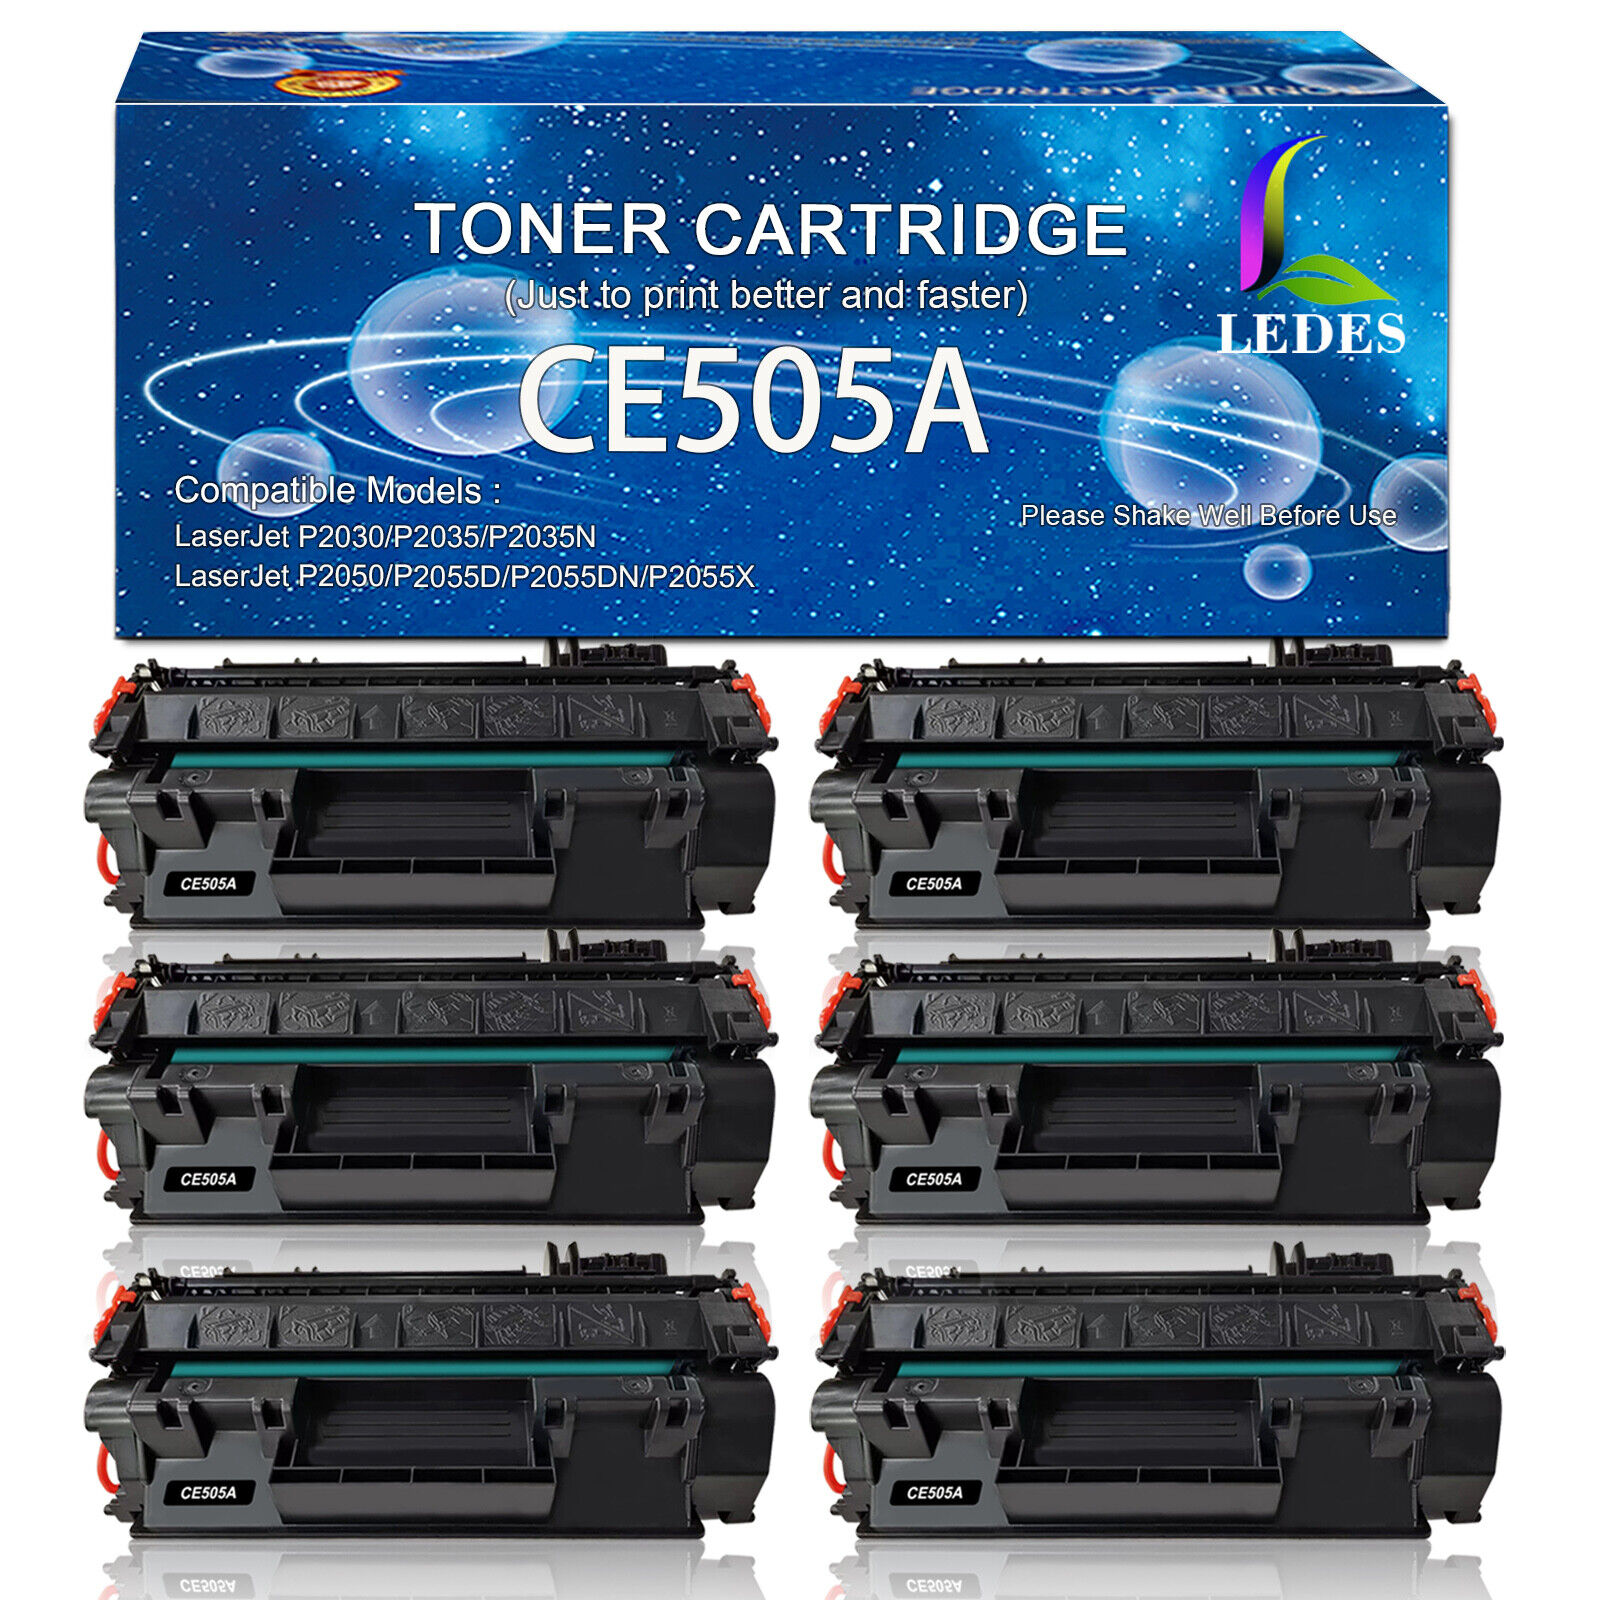 6Pack CE505A 05A High Yield Toner Cartridge For HP LaserJet P2055dn P2035n P2050